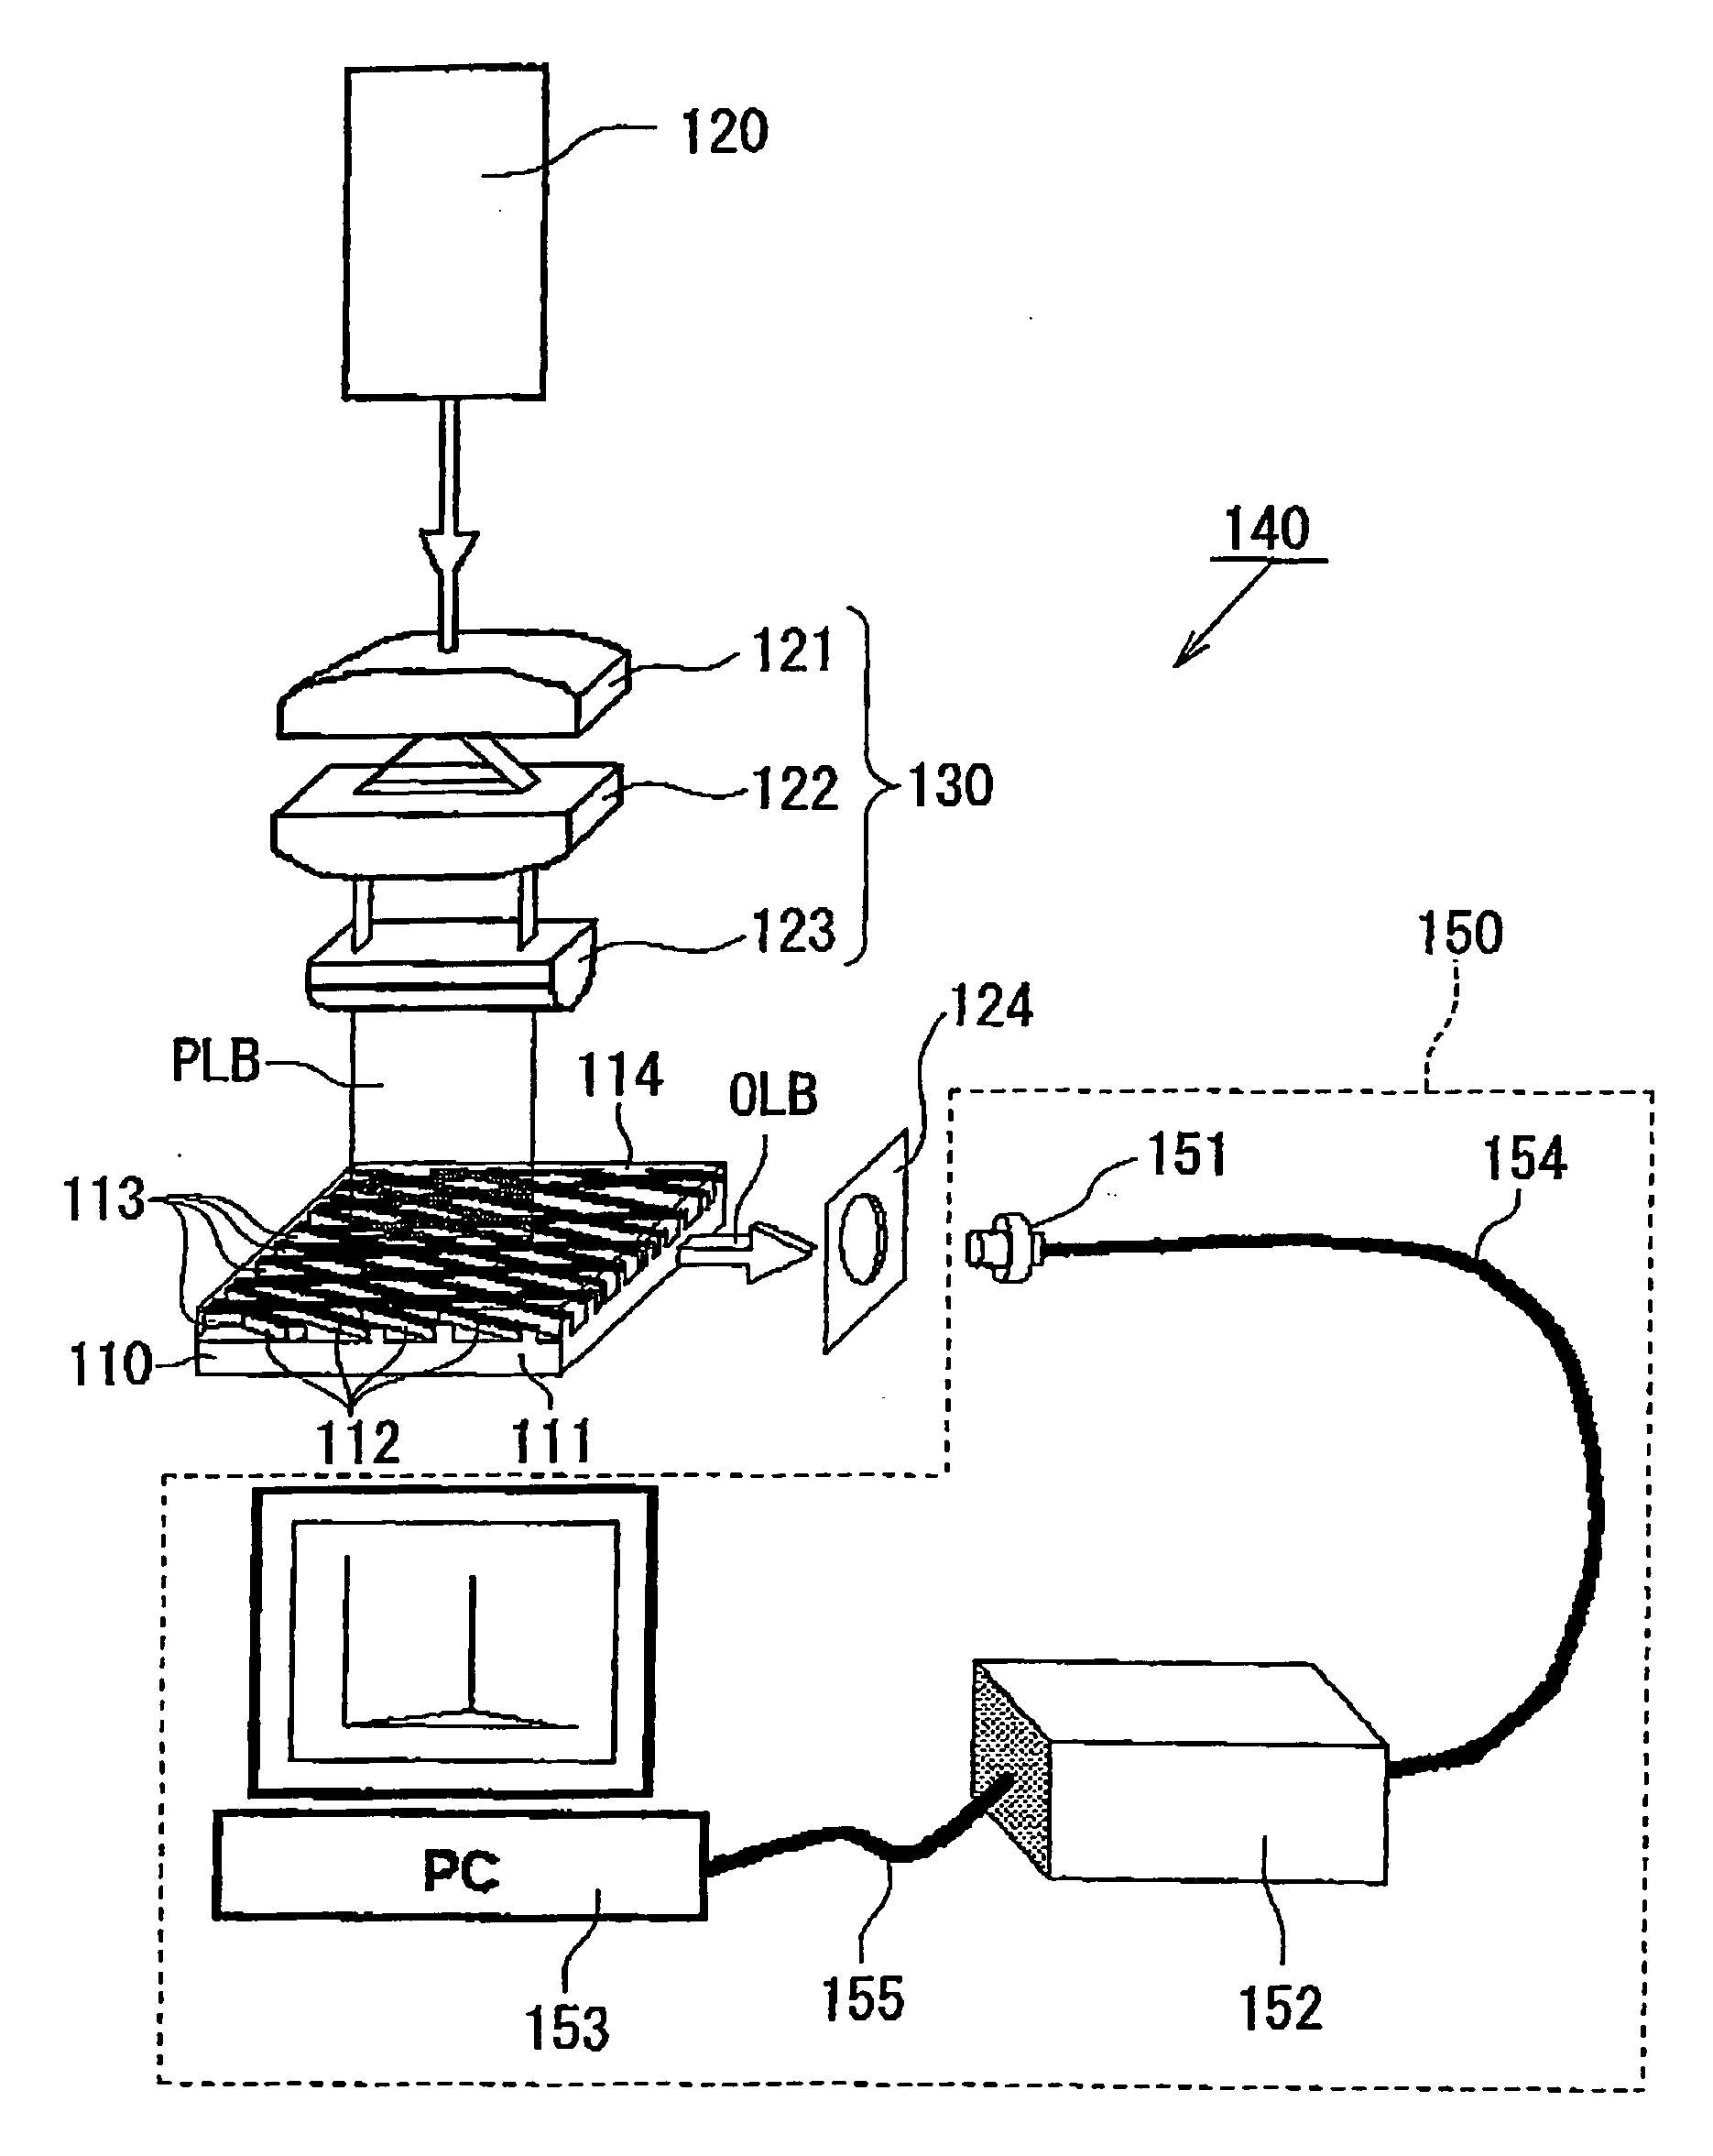 Method and apparatus for producing grating, and DFB solid-state dye laser based on the grating